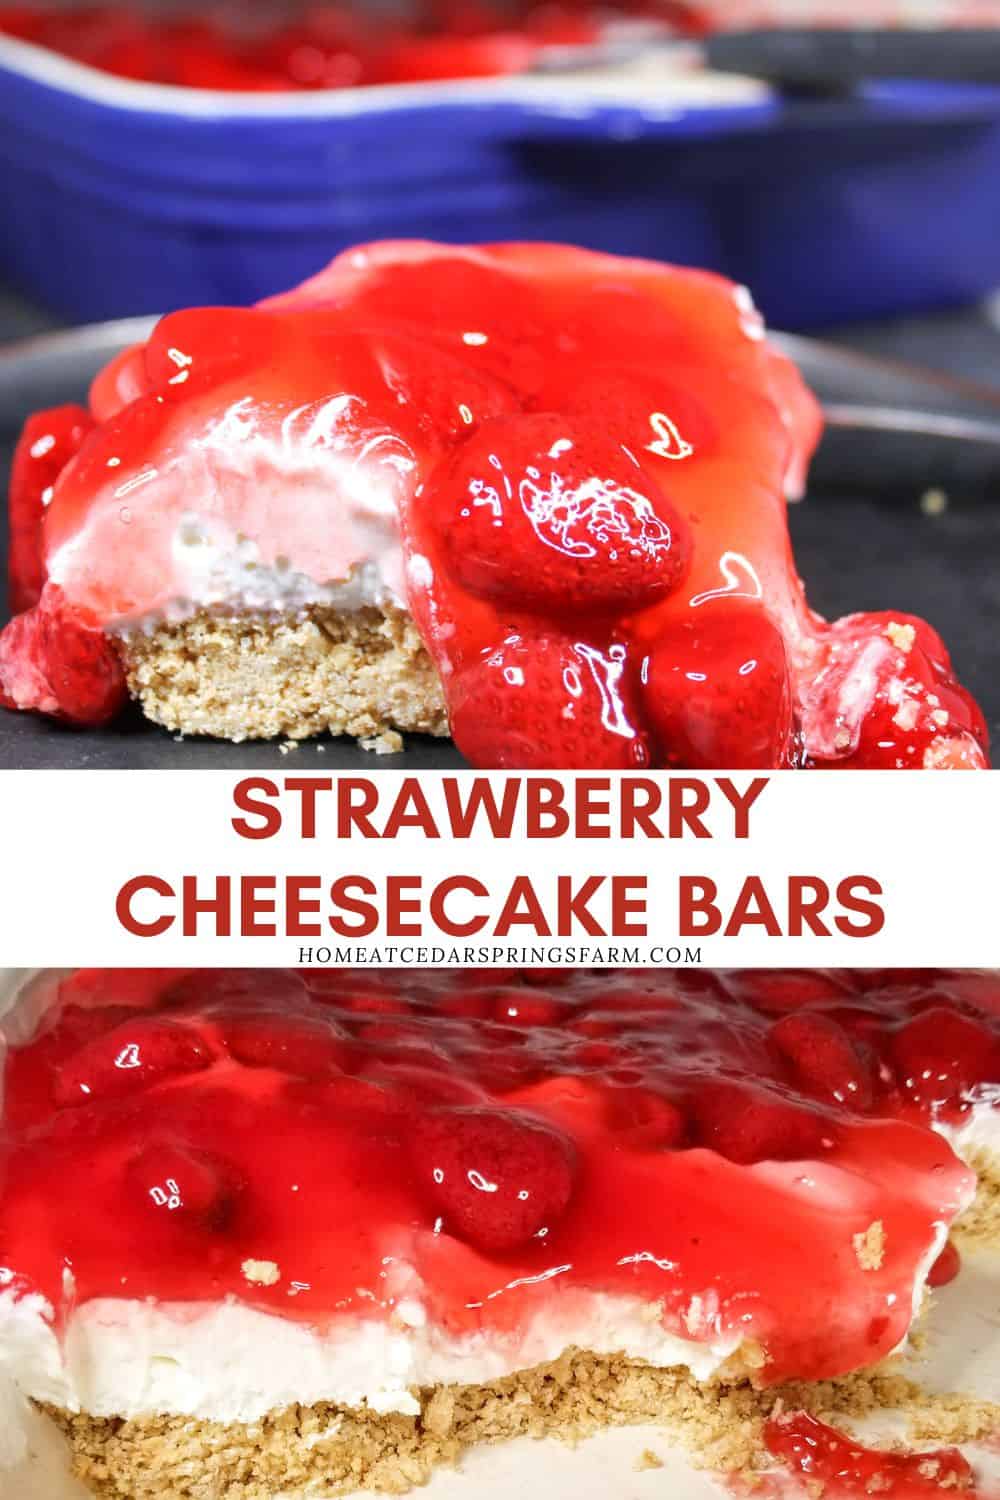 Strawberry cheesecake shown on a plate and in a baking dish with text overlay.